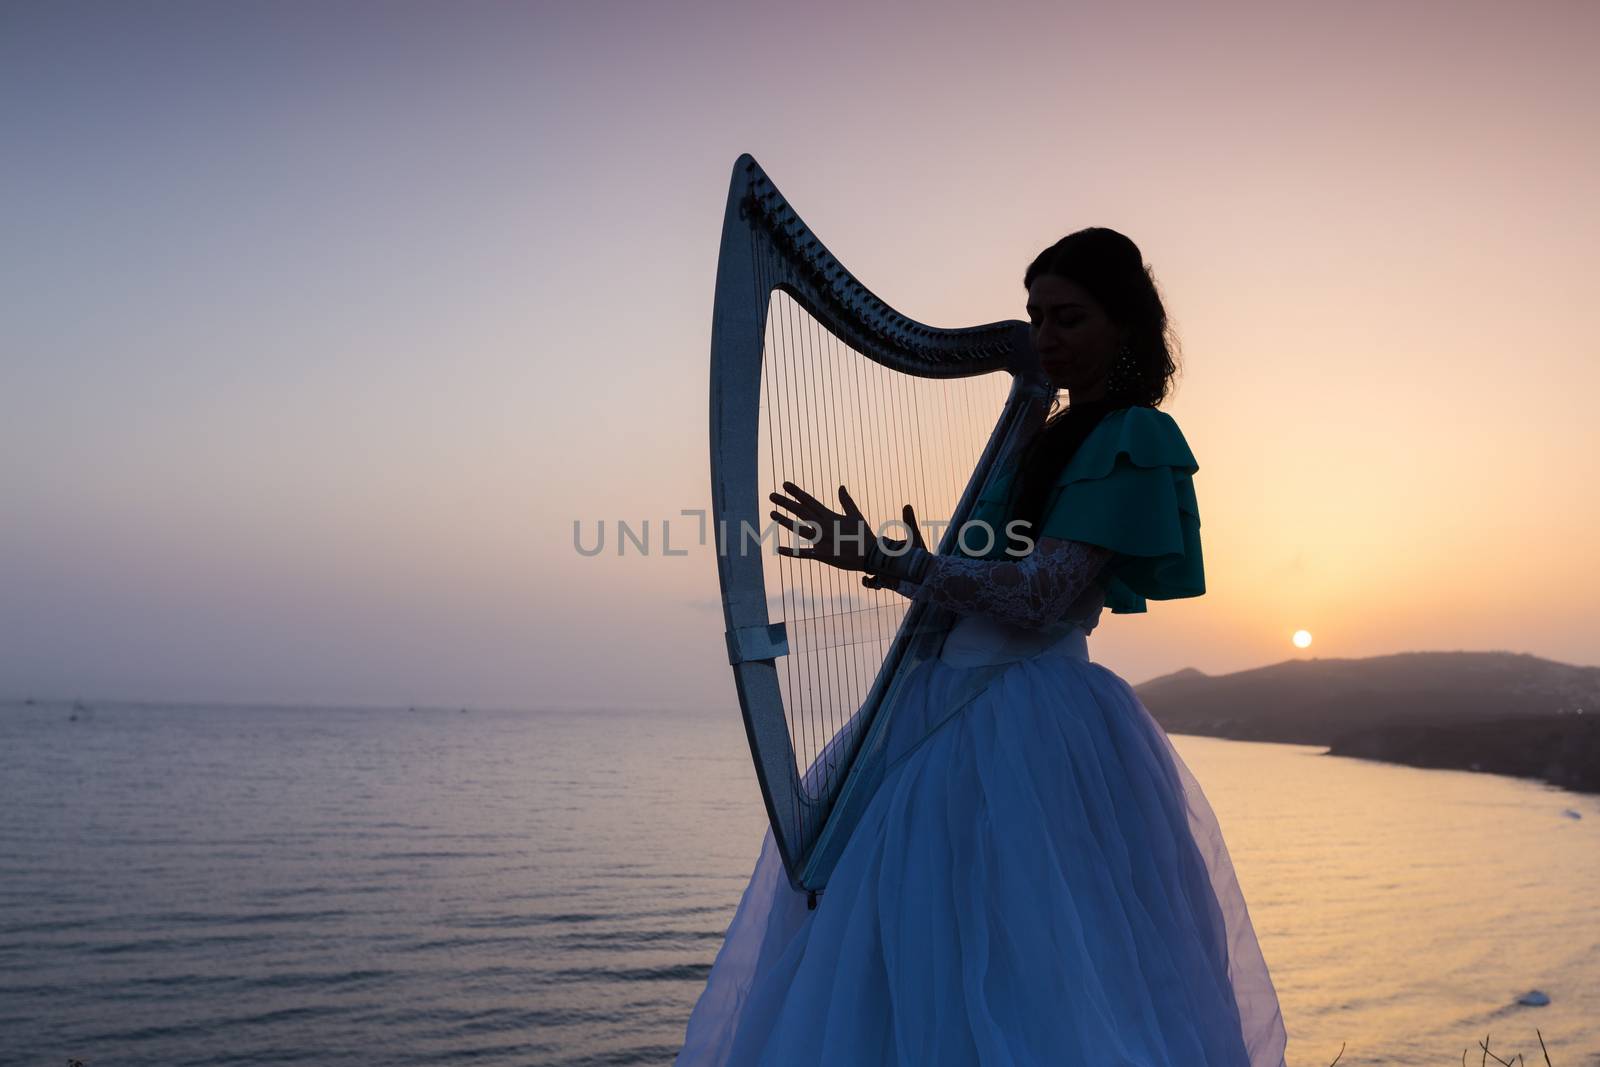 Silhouette woman plays harp by the sea at sunset in Santorini, Greece